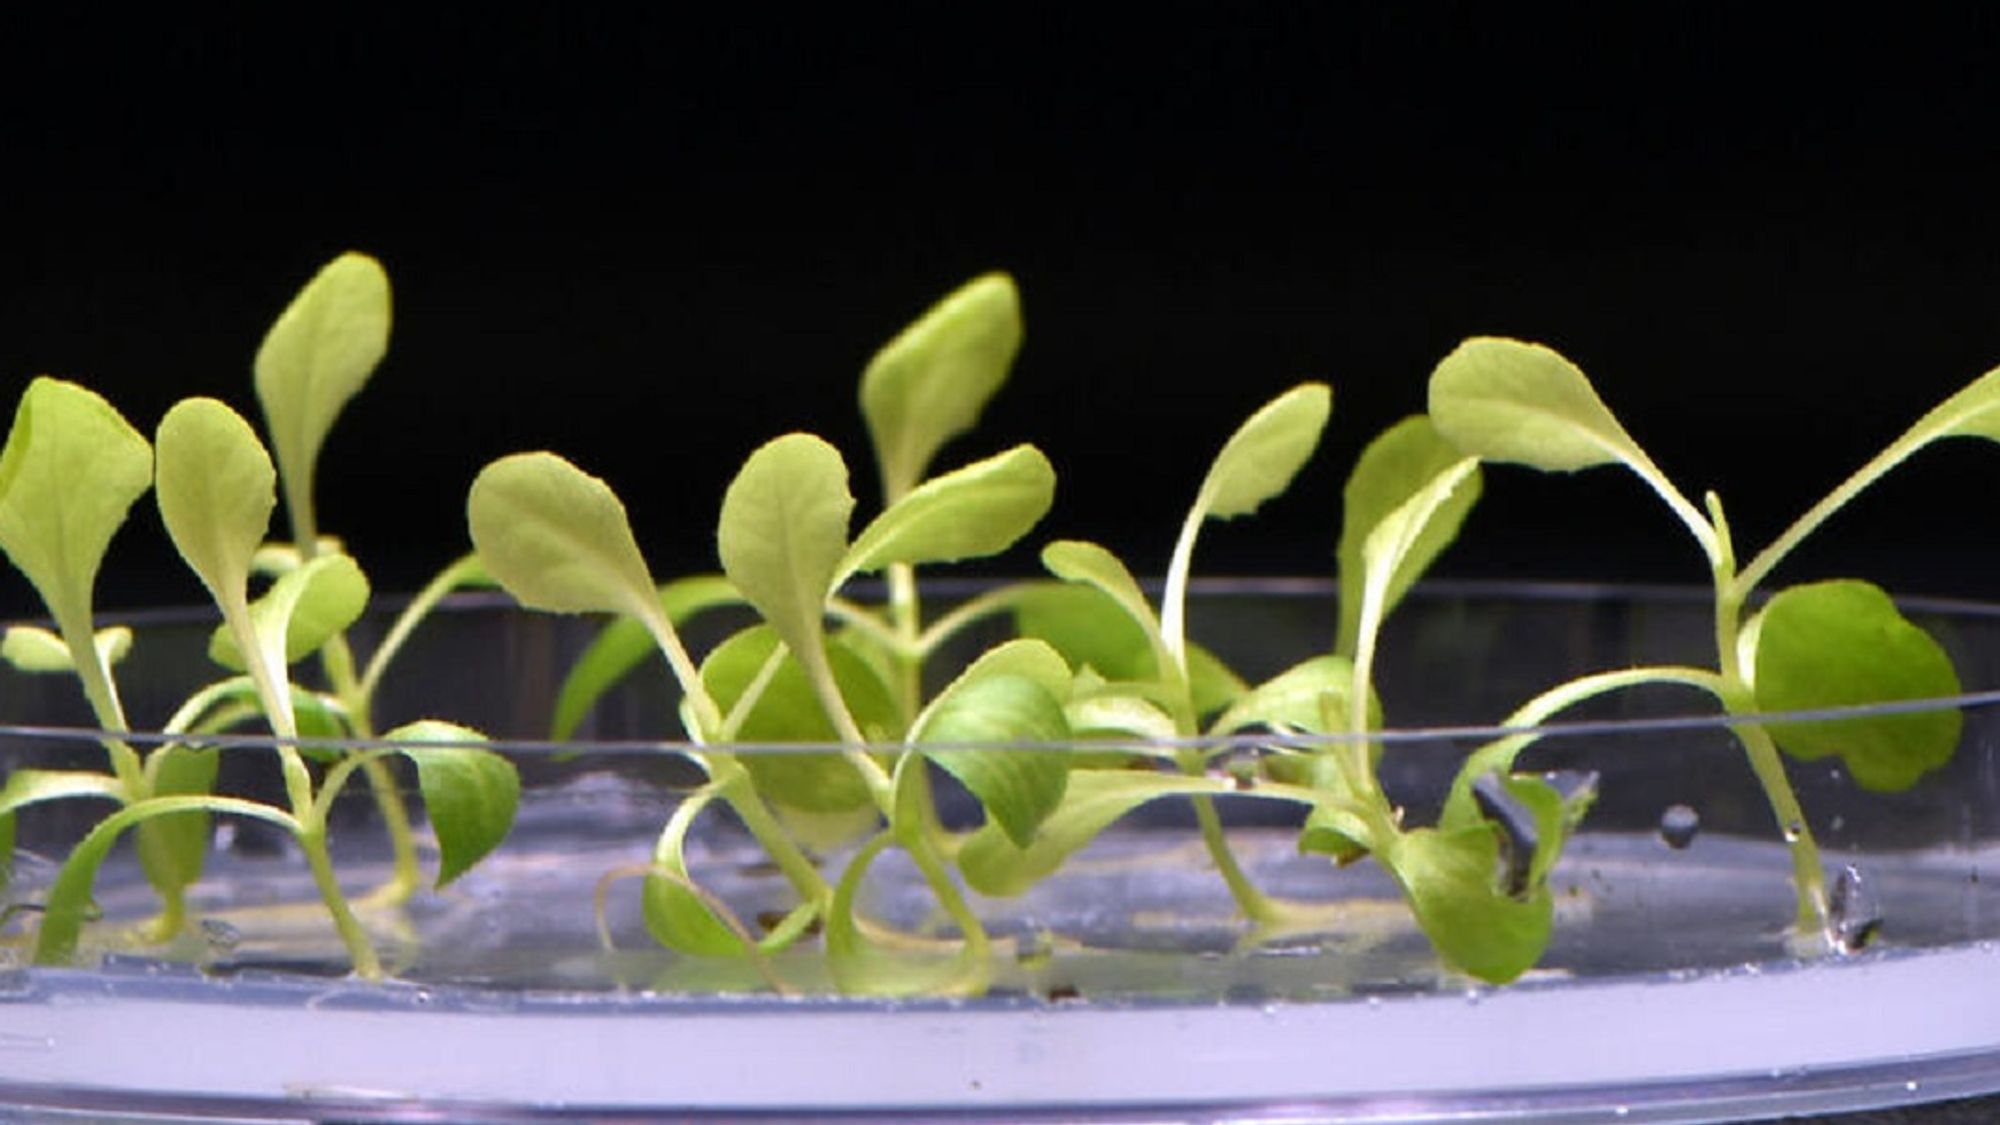 New Artificial Photosynthesis Method Grows Food With No Sunshine